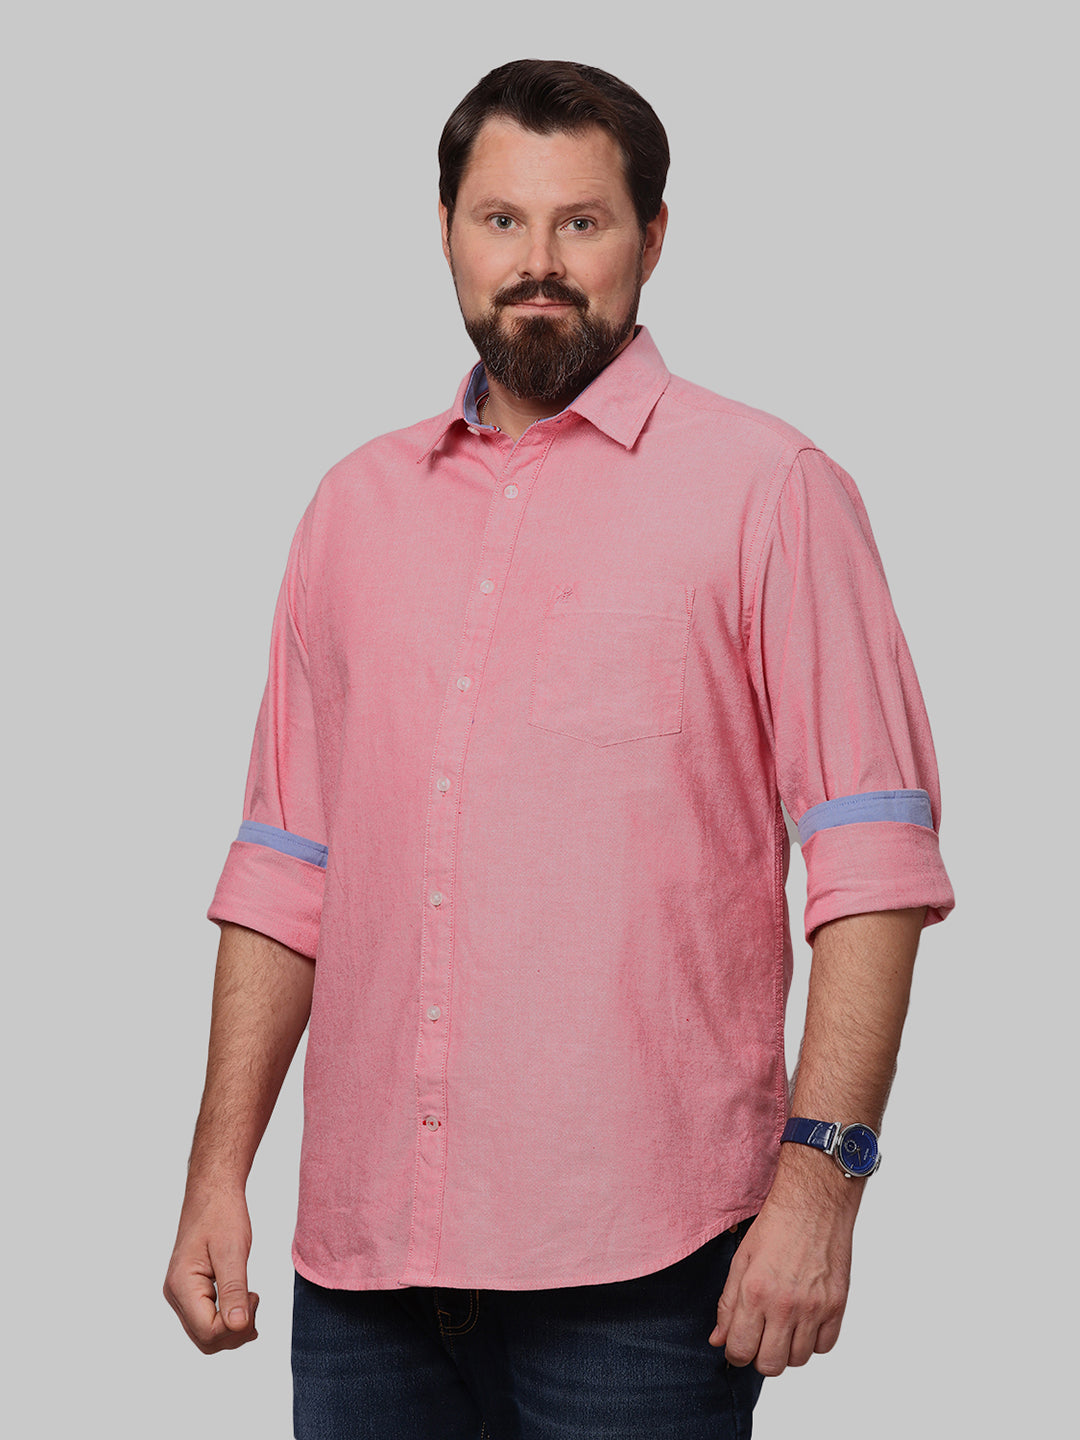 Big & Bold Pink Solid Casual Slim Fit Shirt ( Plus Size ) - Double Two